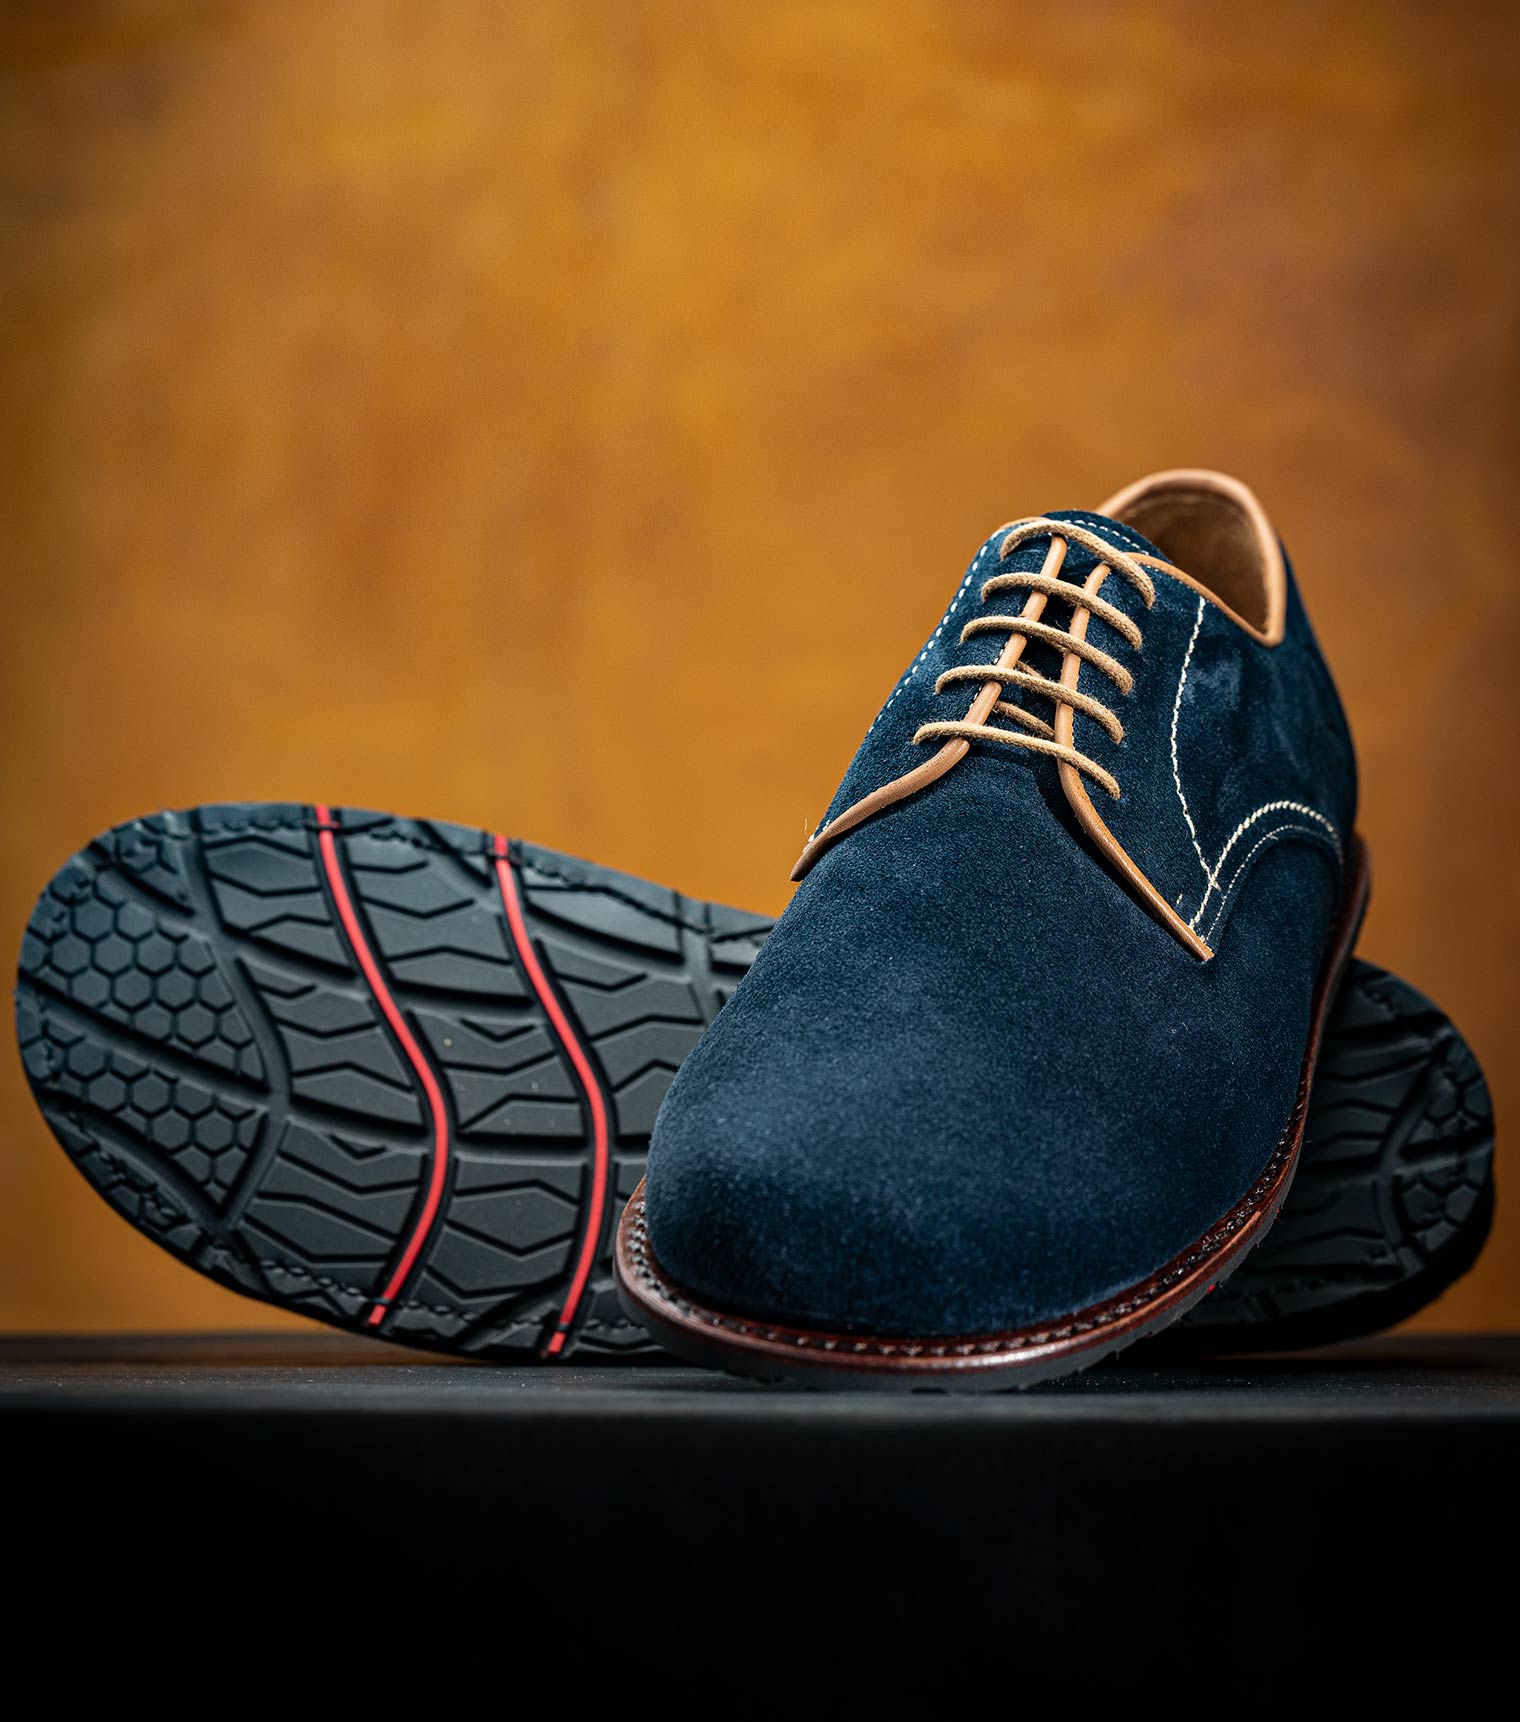 Goodyear Welted Blue Suede Barefoot Derby Shoes by Gaucho Ninja